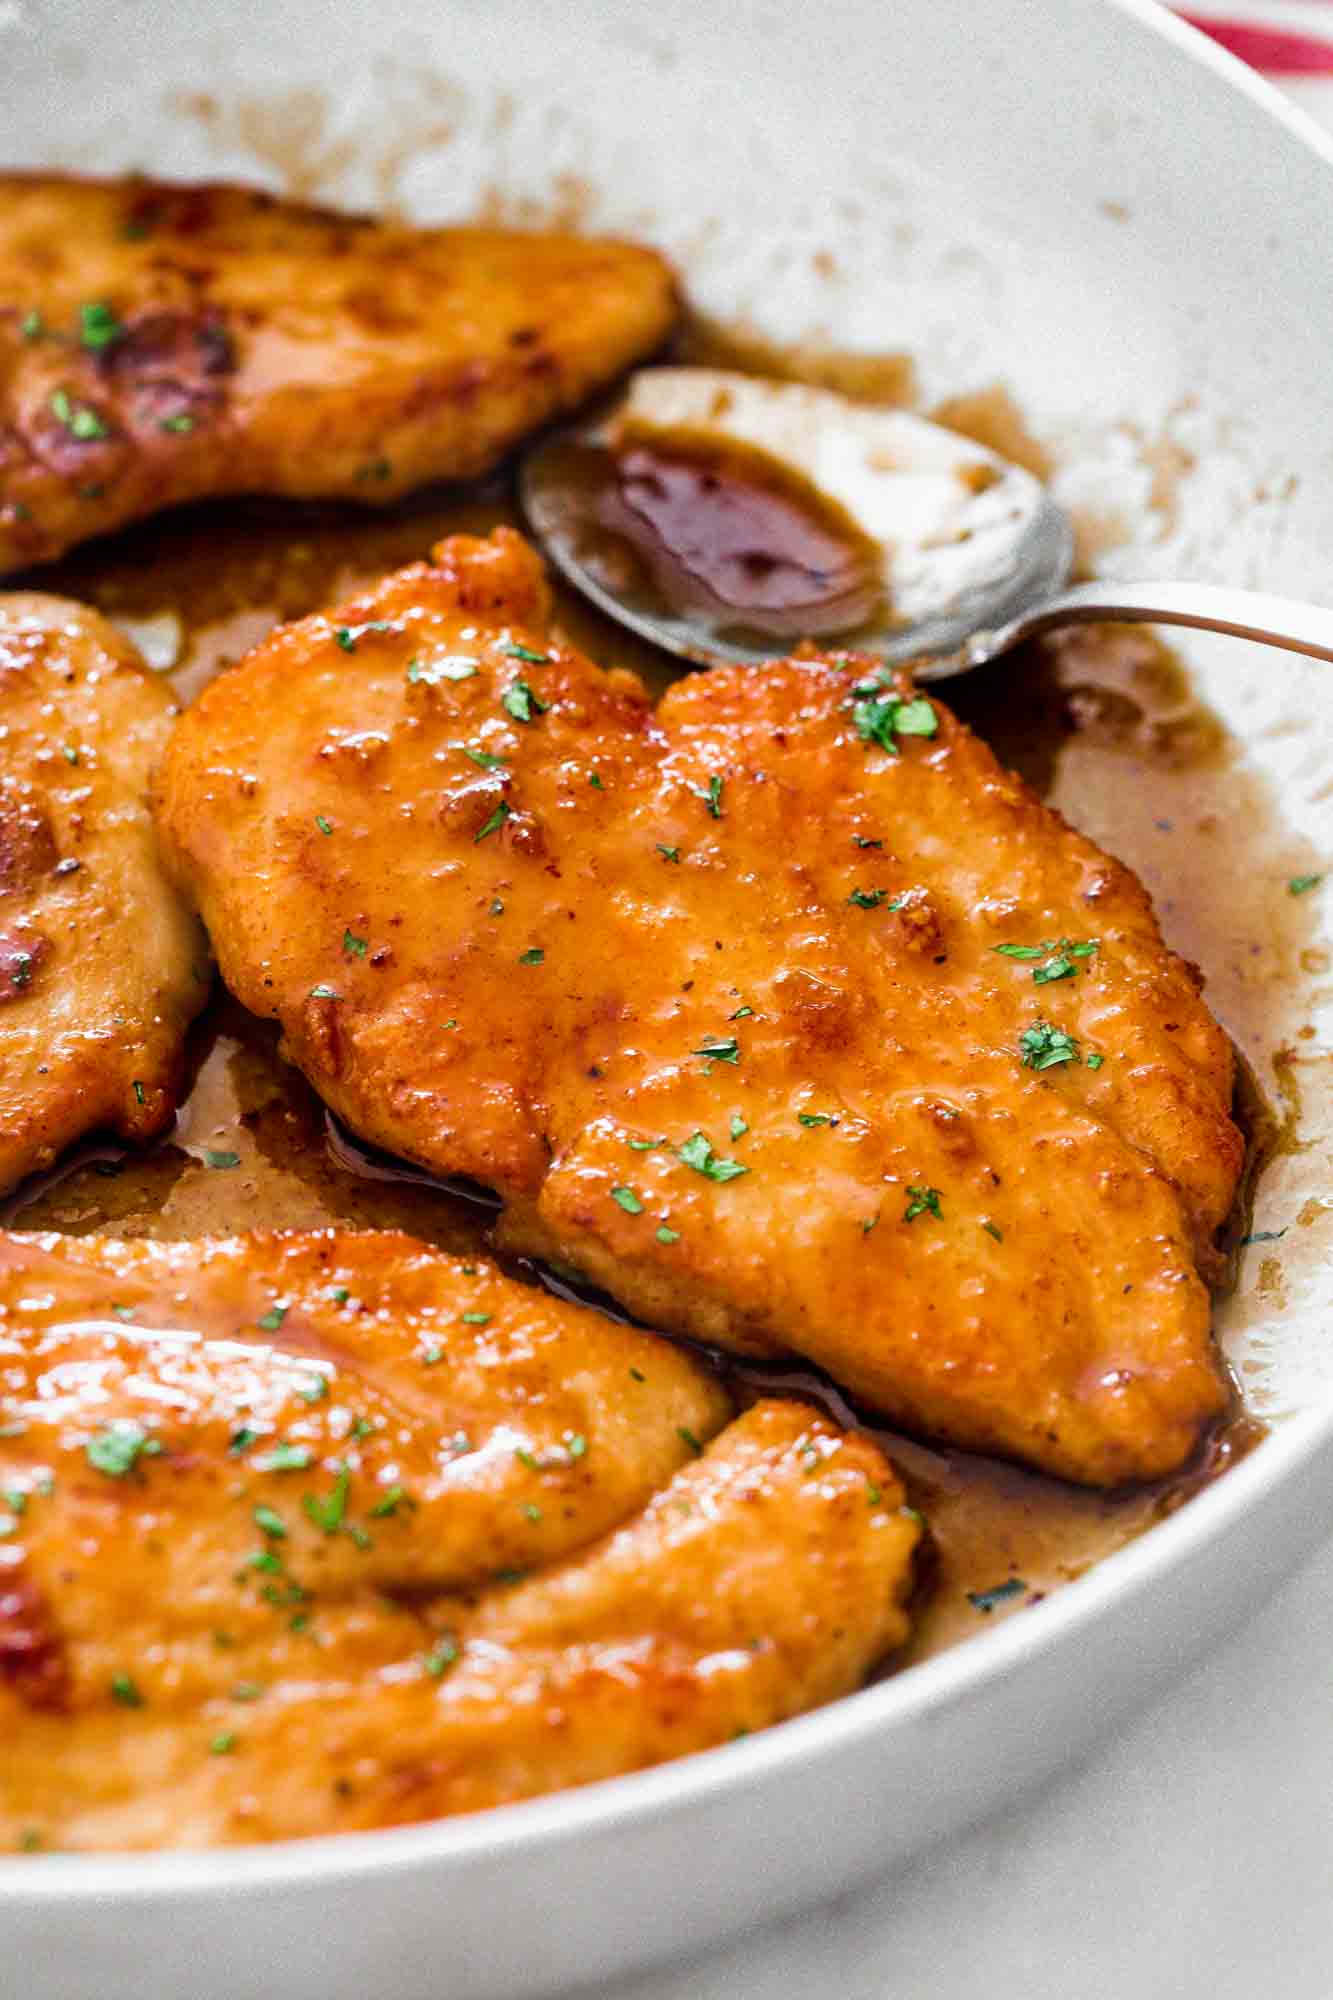 Honey garlic chicken breast cutlets in a skillet with extra sauce